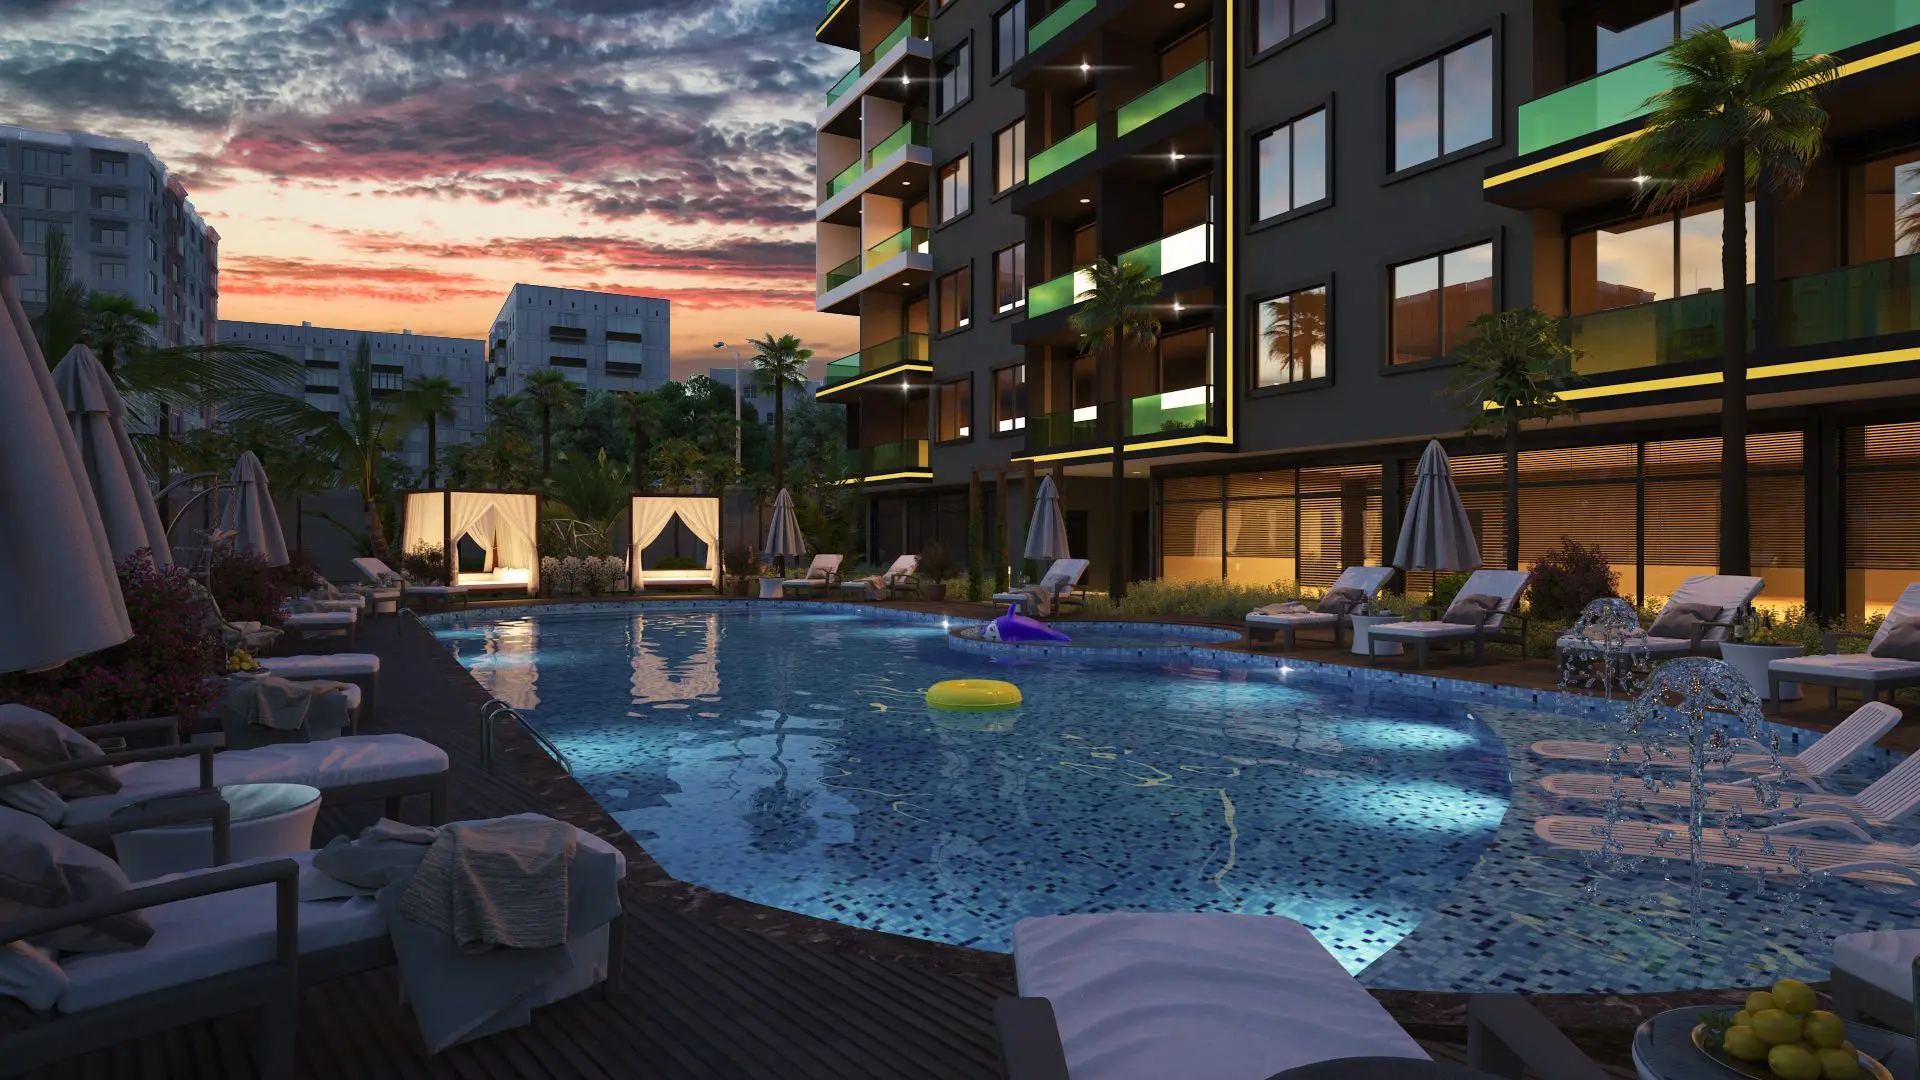 START OF SALES OF A NEW PROJECT 600 M FROM THE SEA IN AVSALLAR ALANYA